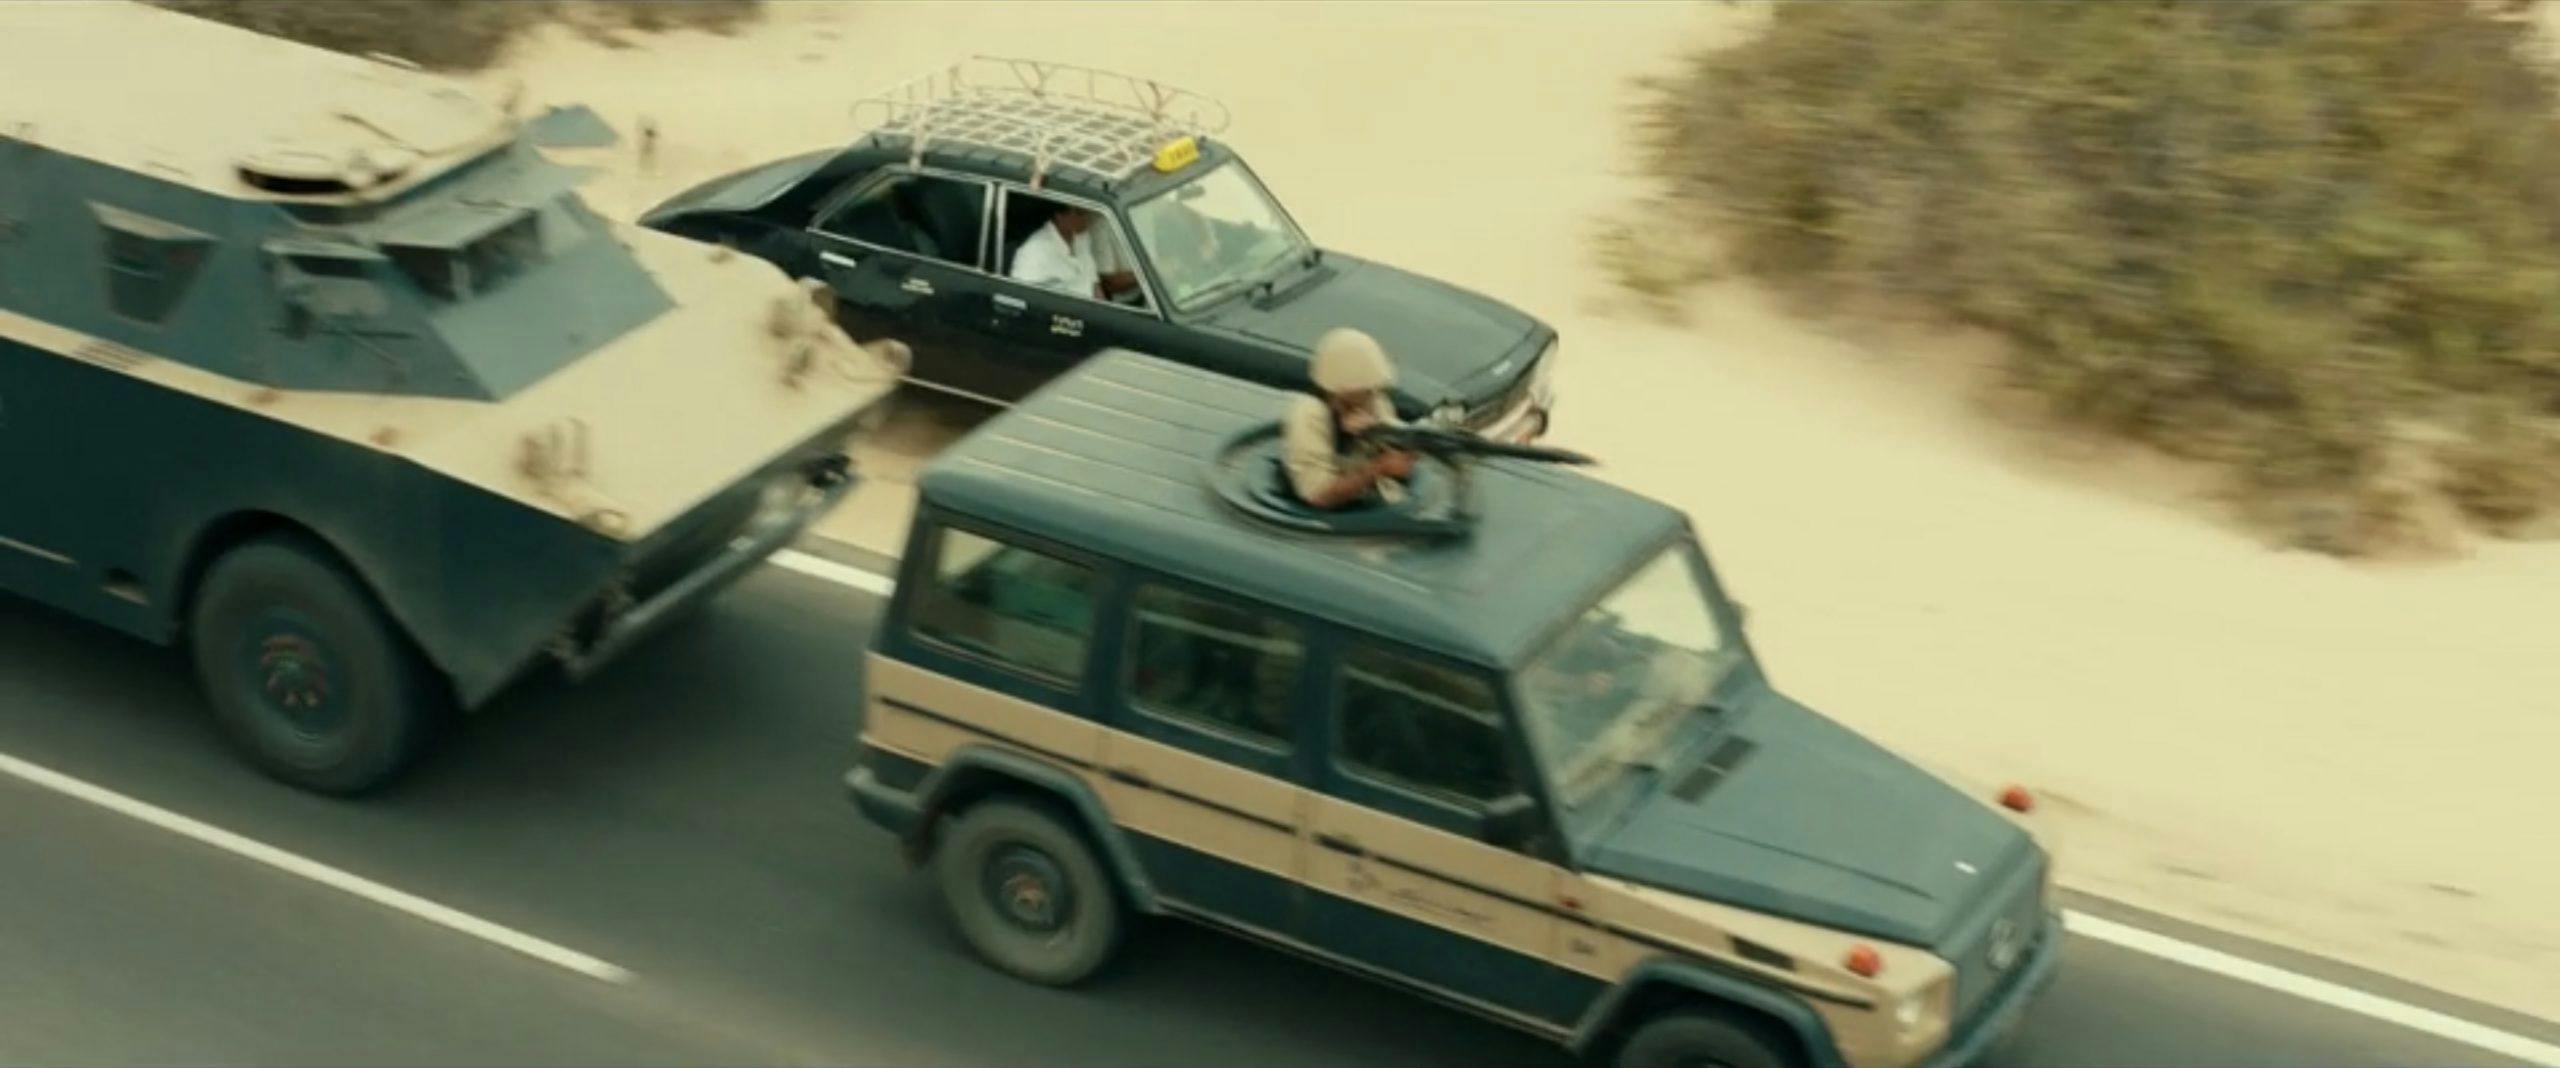 Mercedes G Wagon militarized chase scene action